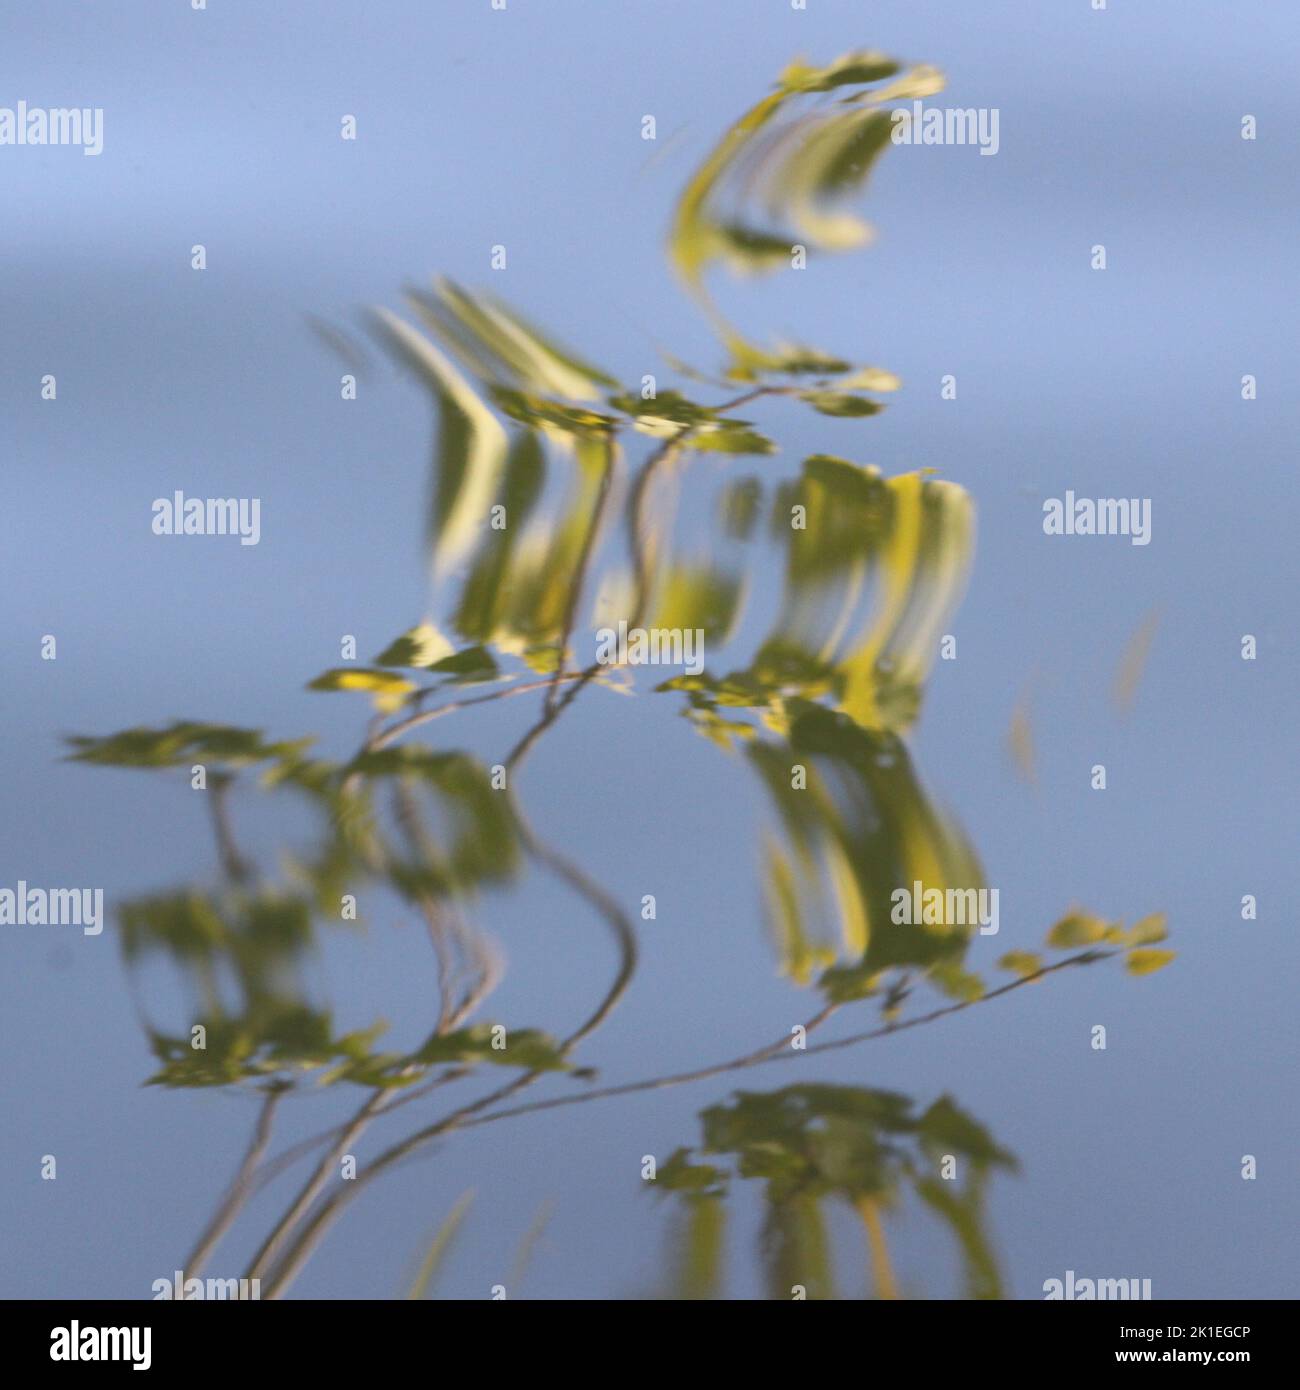 Abstract branch in water reflection Stock Photo